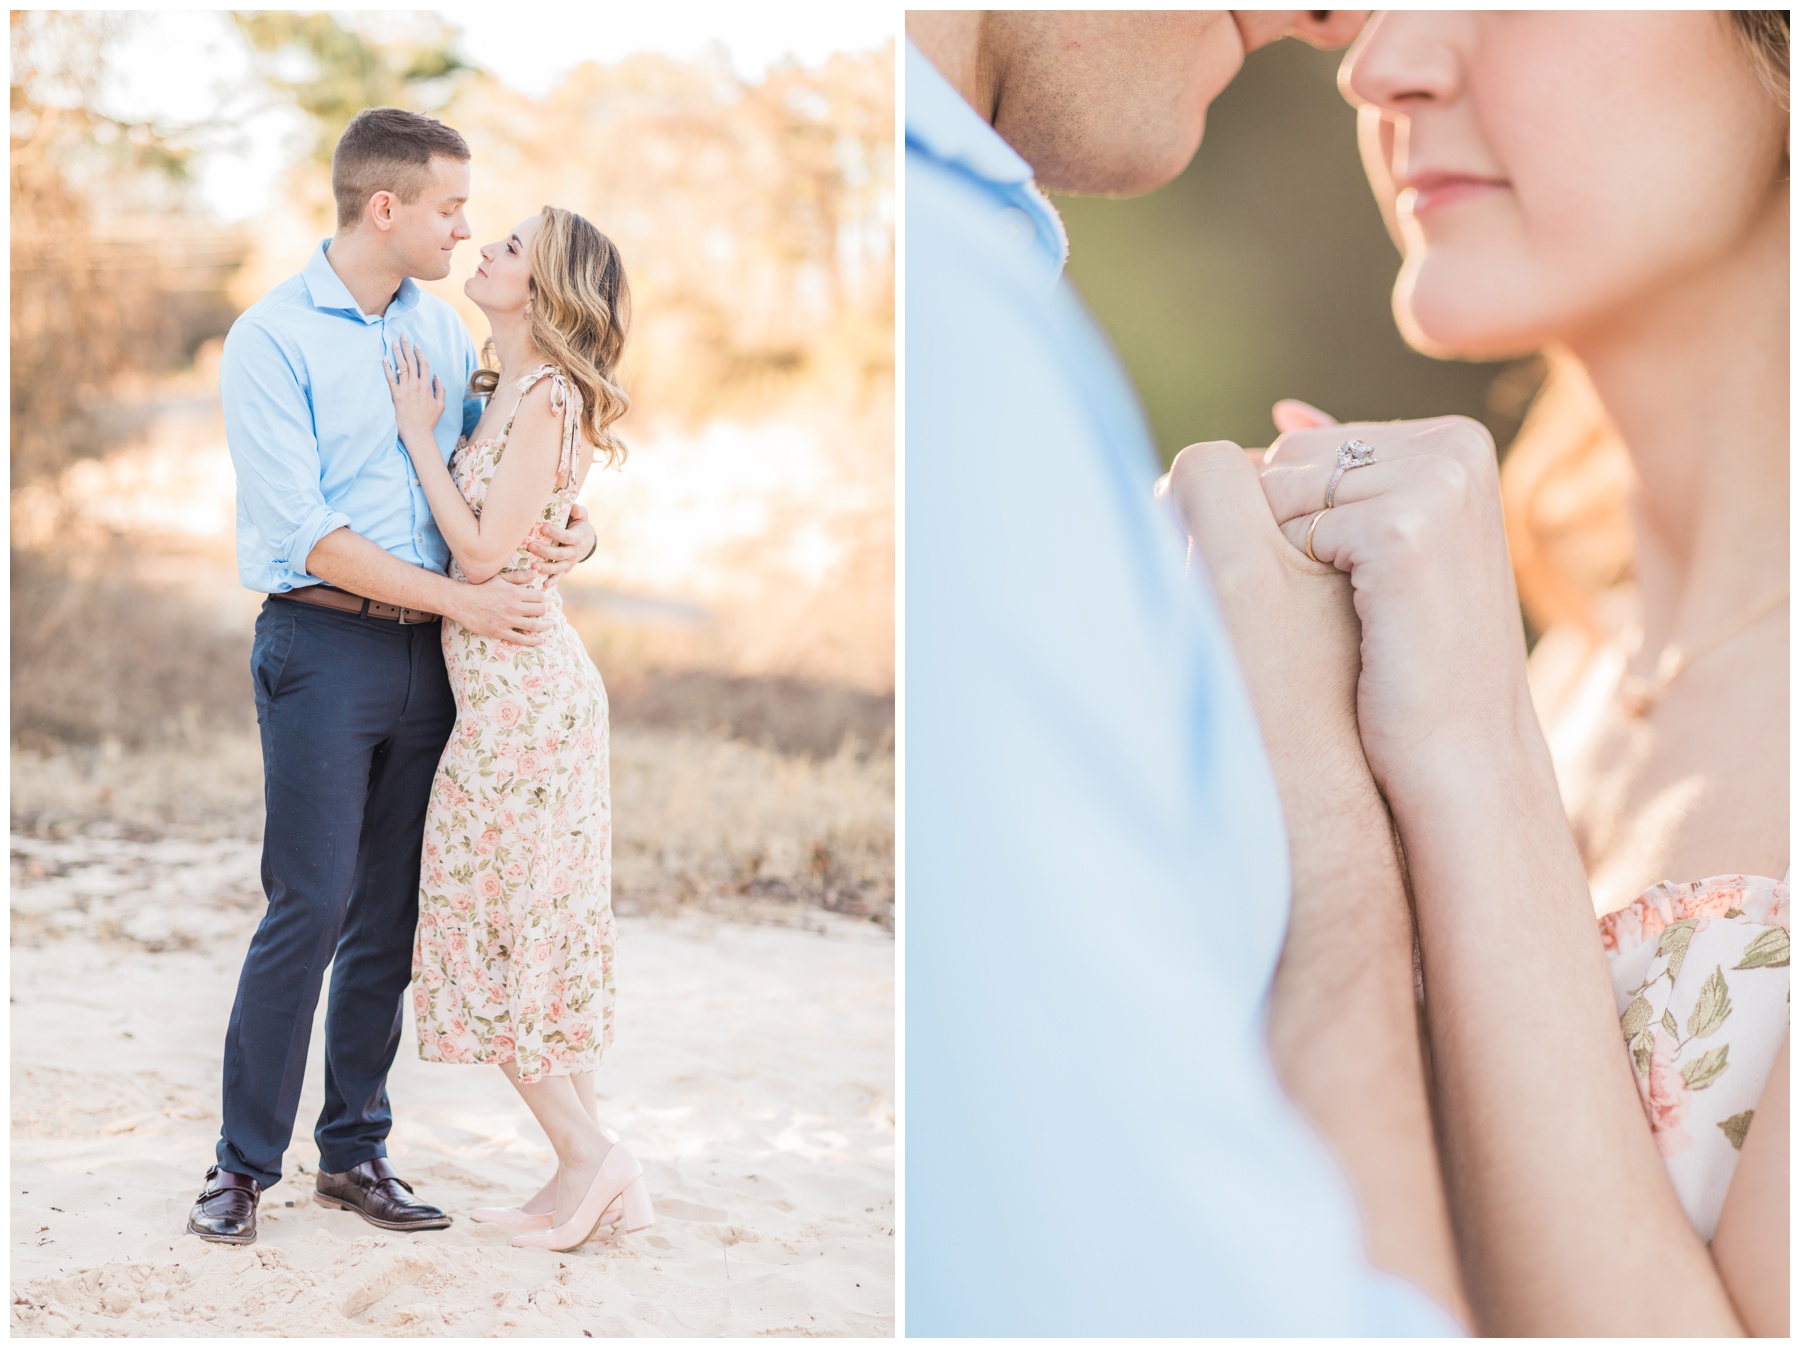 Golden hour engagement photos in a creek bed 